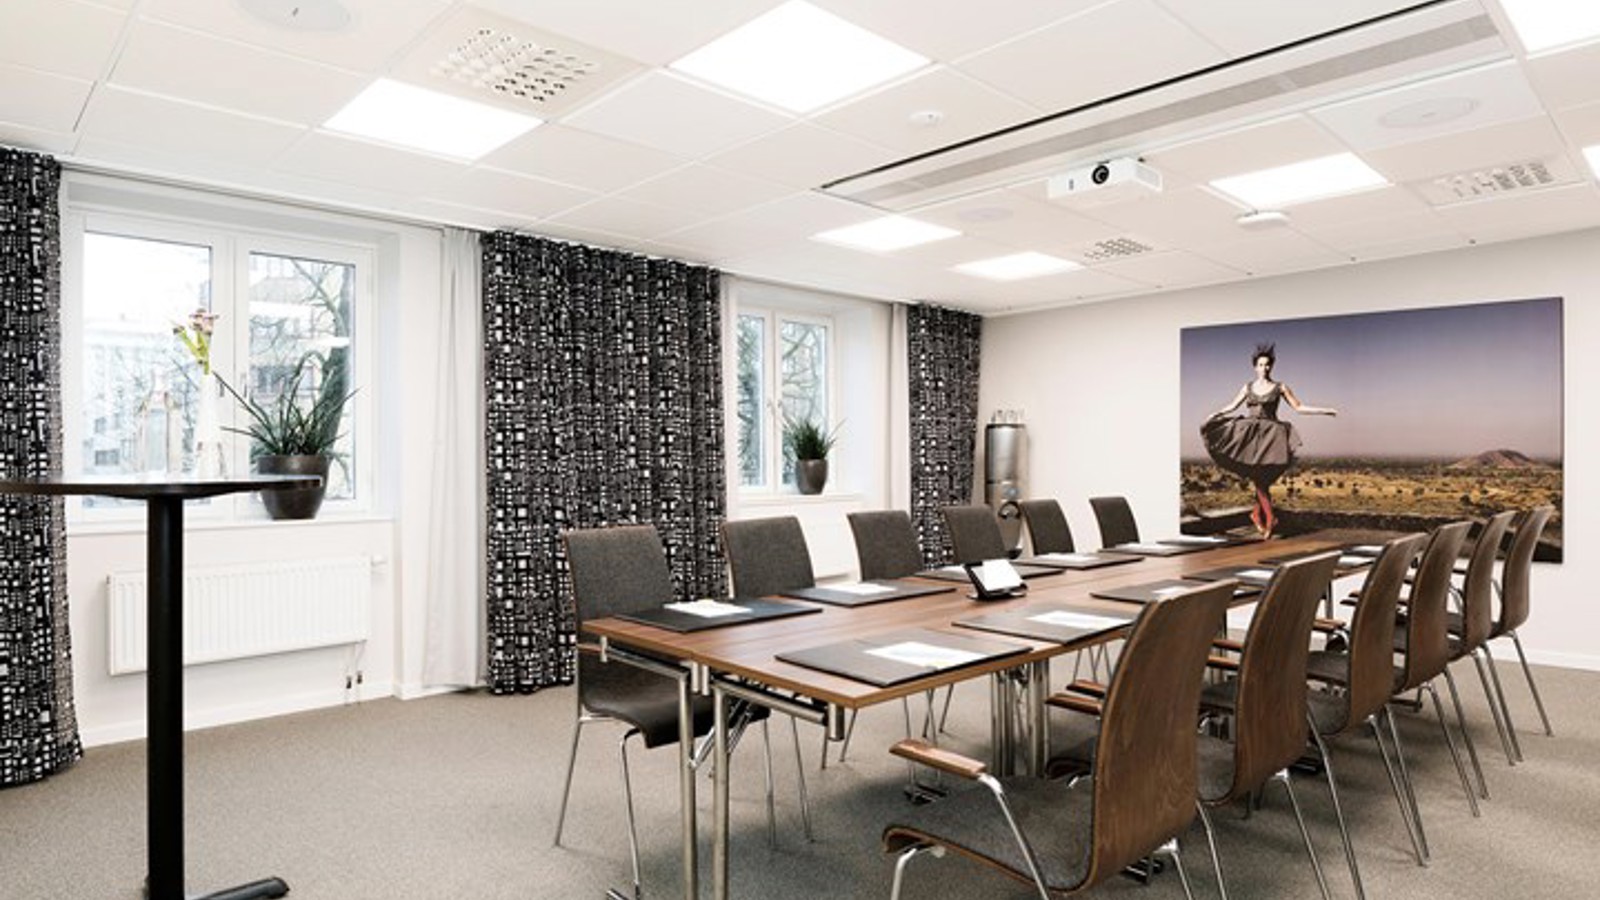 Boardroom with gray curtains